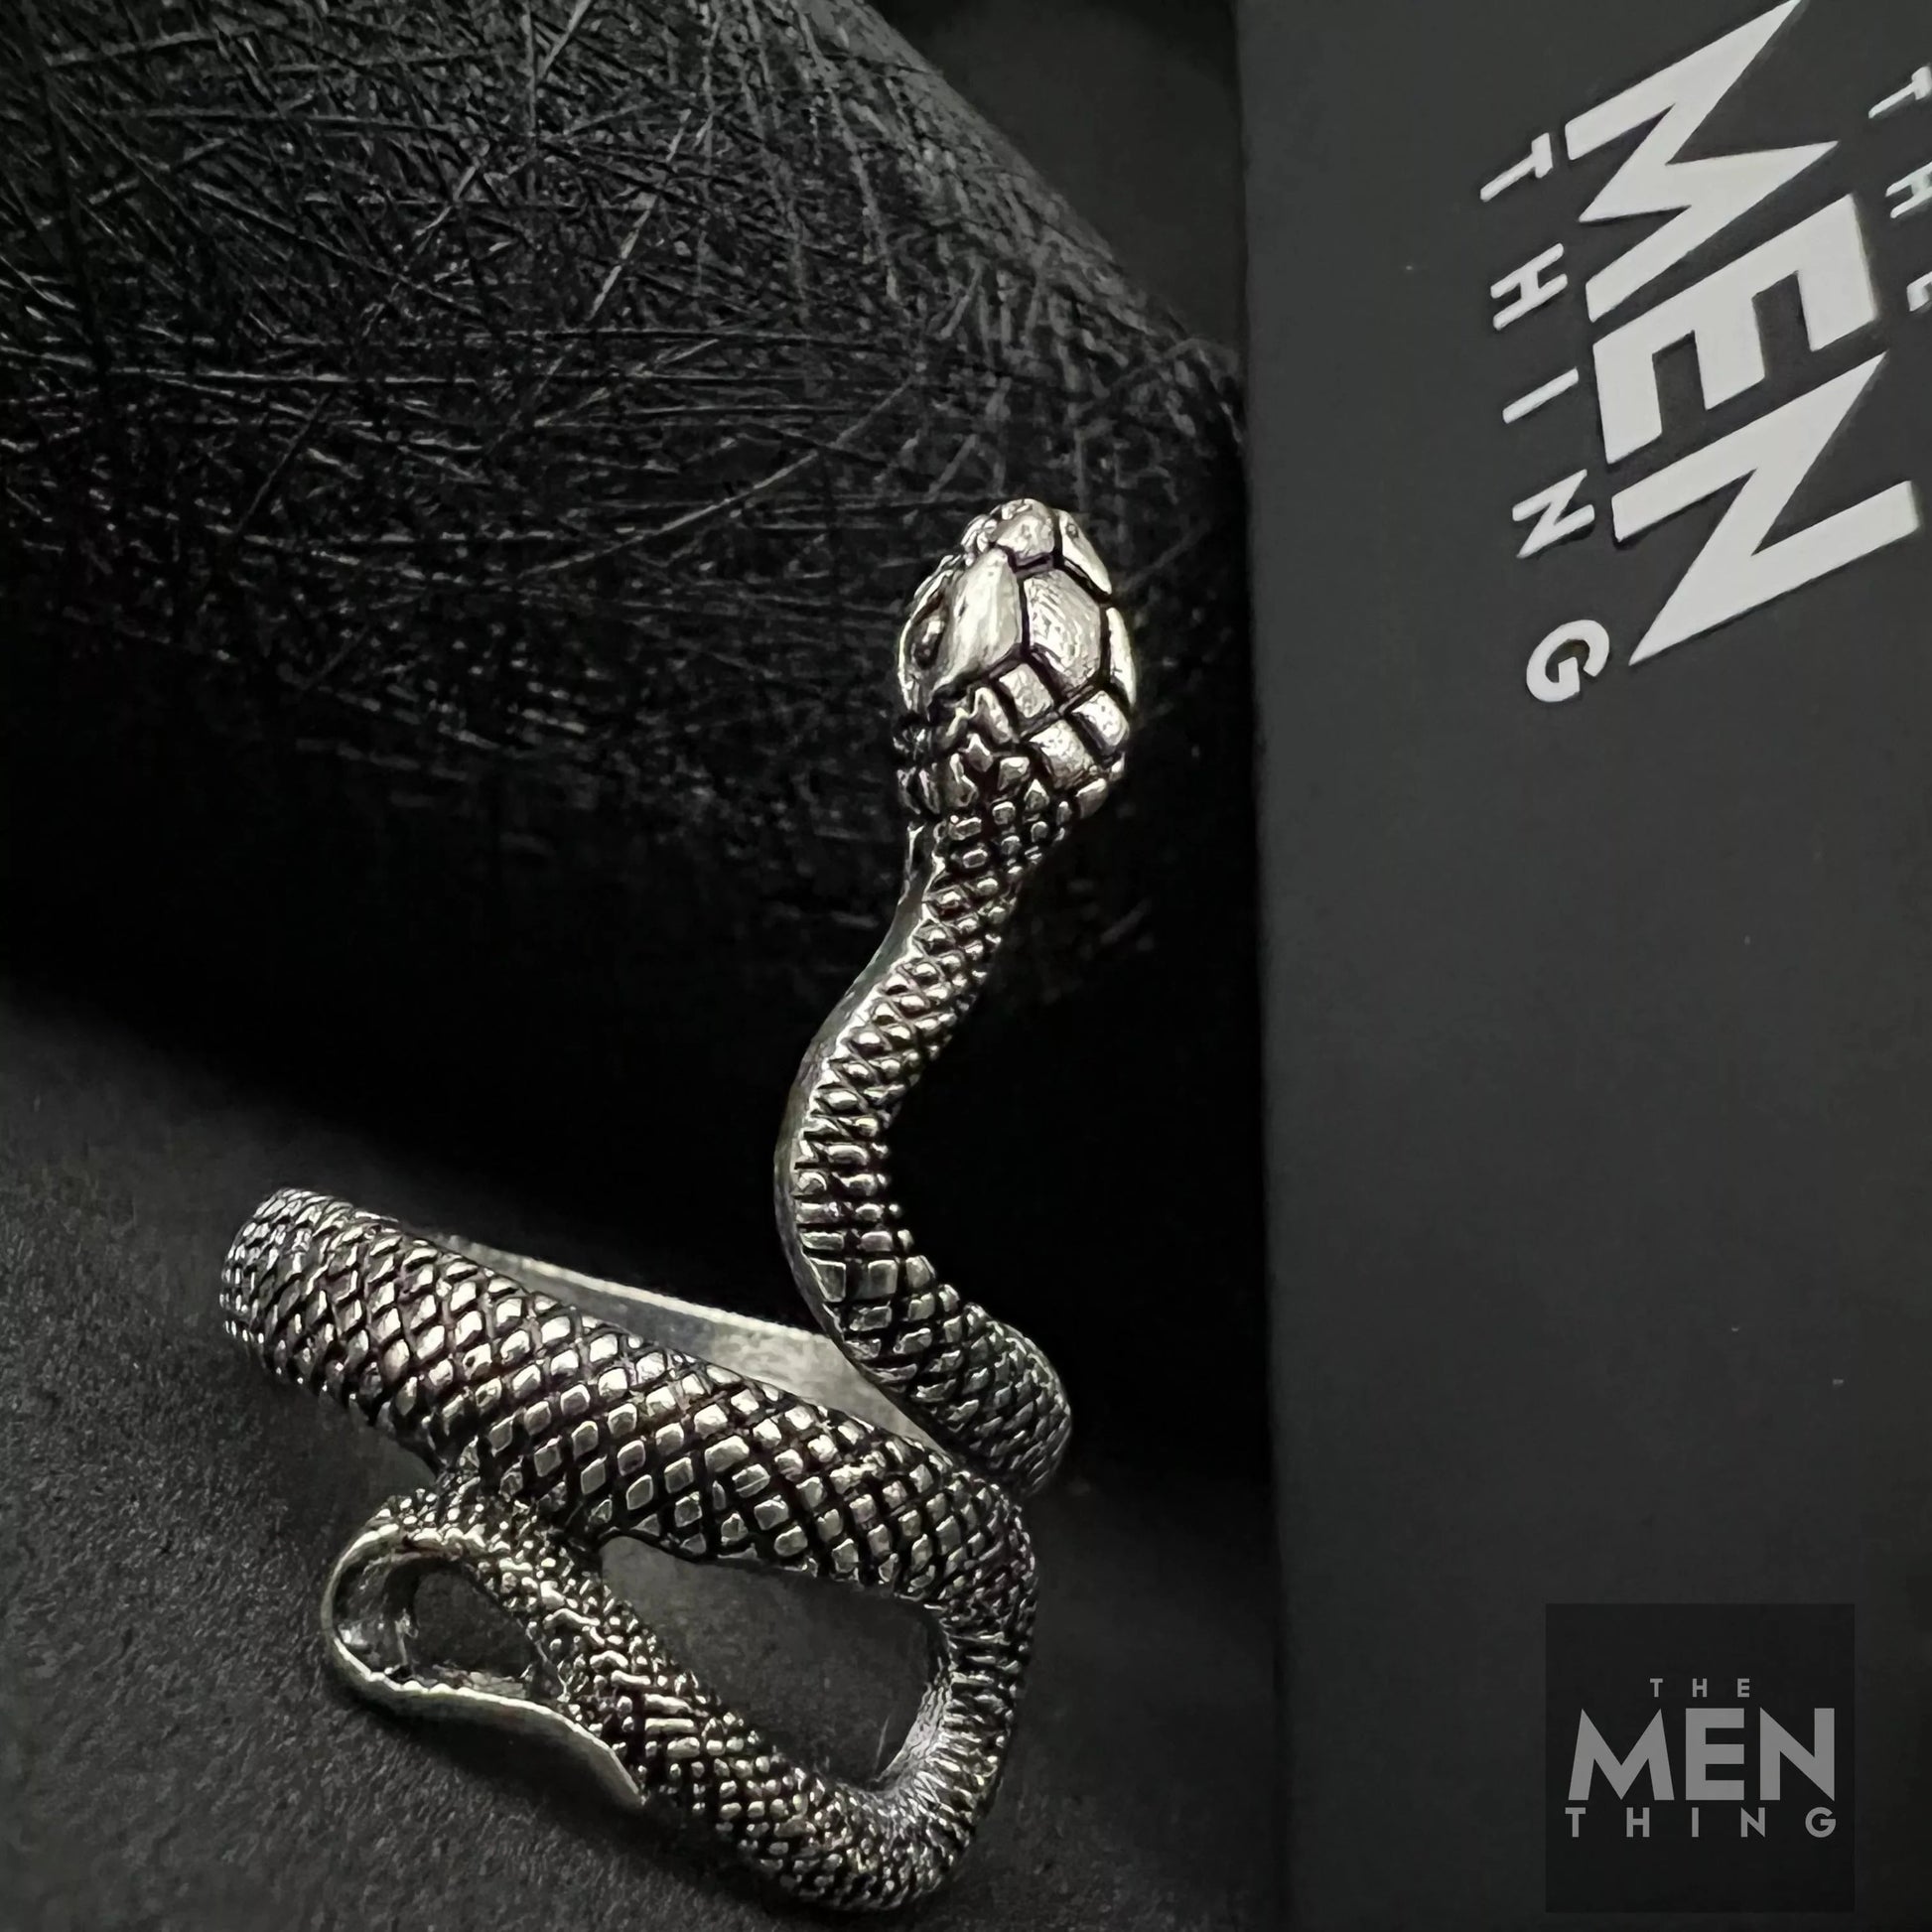 THE MEN THING Alloy Adjustable Vintage Silver Snake Ring for Men, American trending Style - Funky, Punk Gothic Rings for Men & Boys